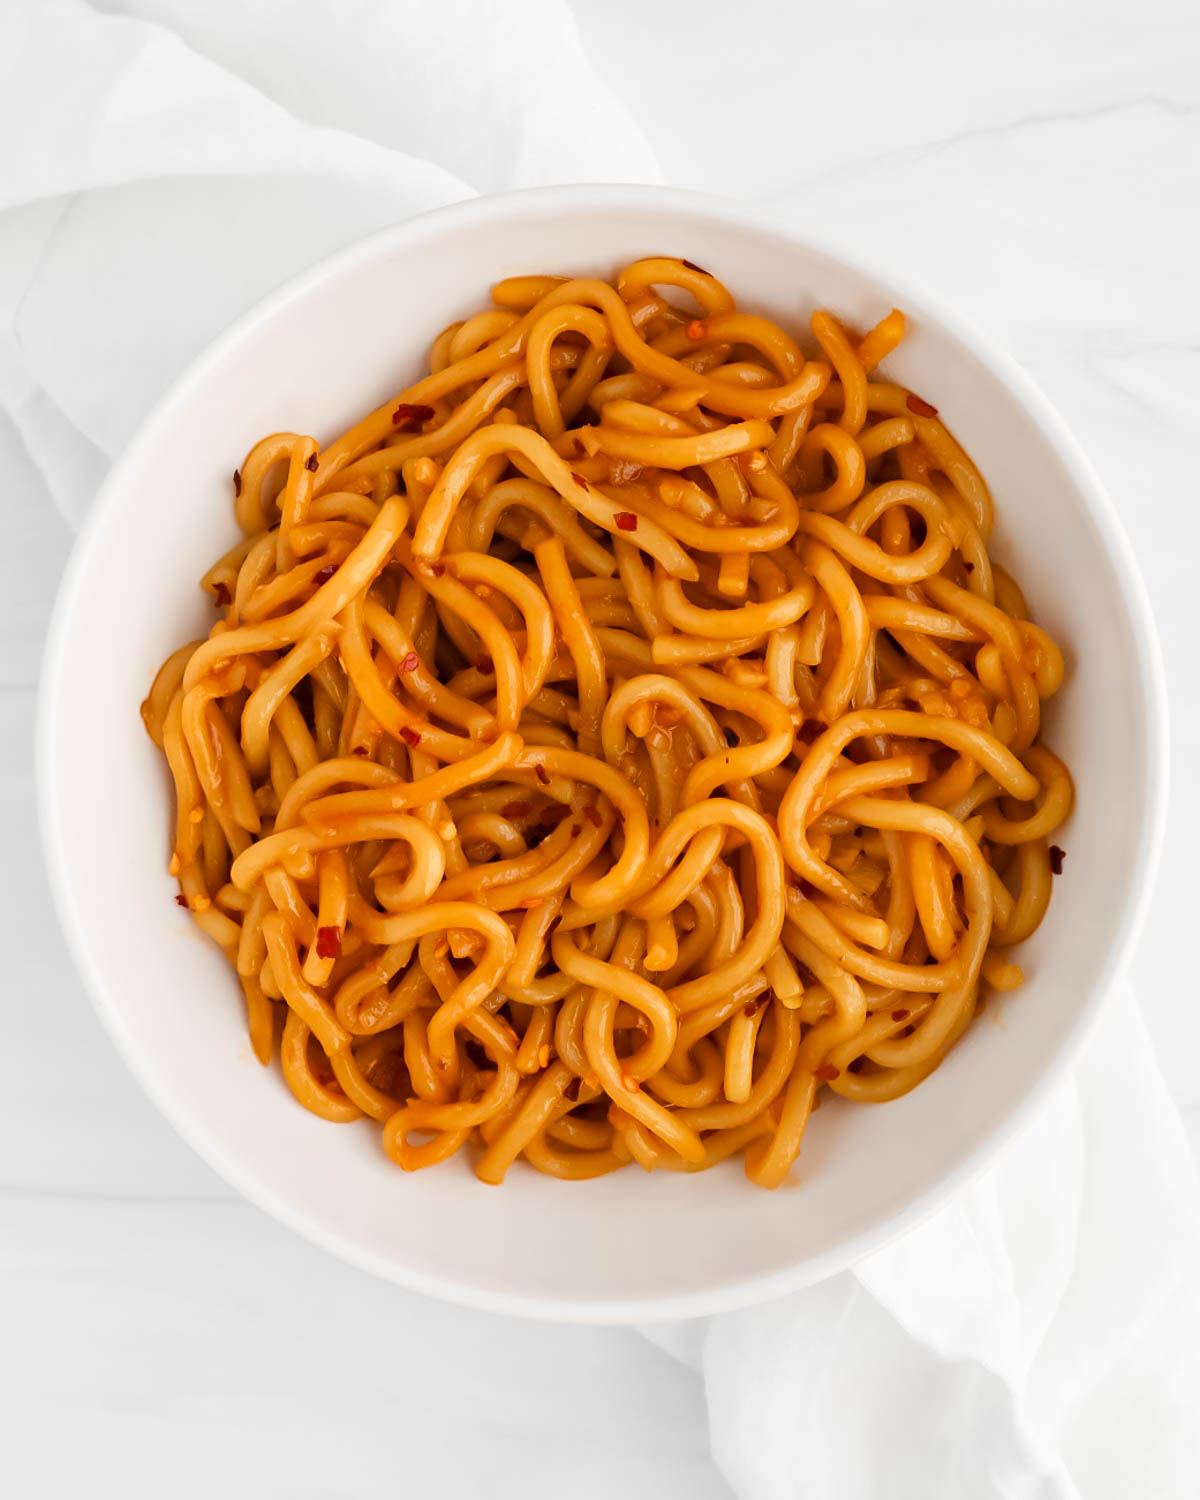 Cooked noodles tossed in a brown sauce.